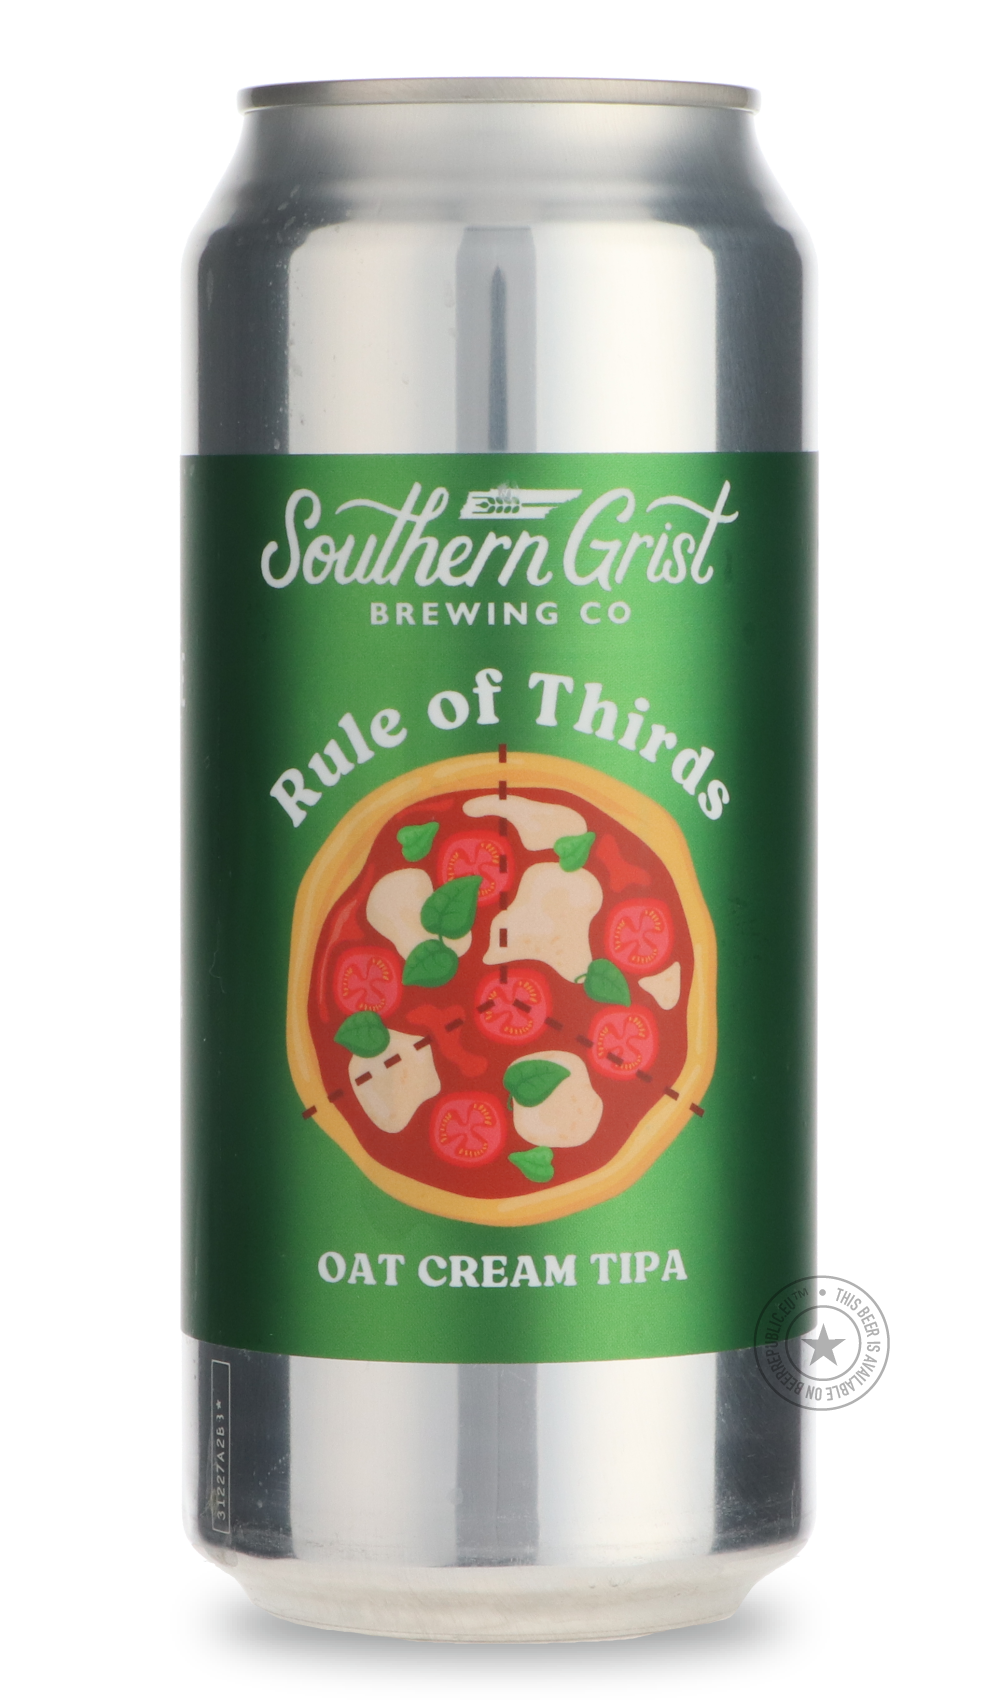 -Southern Grist- Rule of Thirds-IPA- Only @ Beer Republic - The best online beer store for American & Canadian craft beer - Buy beer online from the USA and Canada - Bier online kopen - Amerikaans bier kopen - Craft beer store - Craft beer kopen - Amerikanisch bier kaufen - Bier online kaufen - Acheter biere online - IPA - Stout - Porter - New England IPA - Hazy IPA - Imperial Stout - Barrel Aged - Barrel Aged Imperial Stout - Brown - Dark beer - Blond - Blonde - Pilsner - Lager - Wheat - Weizen - Amber - B